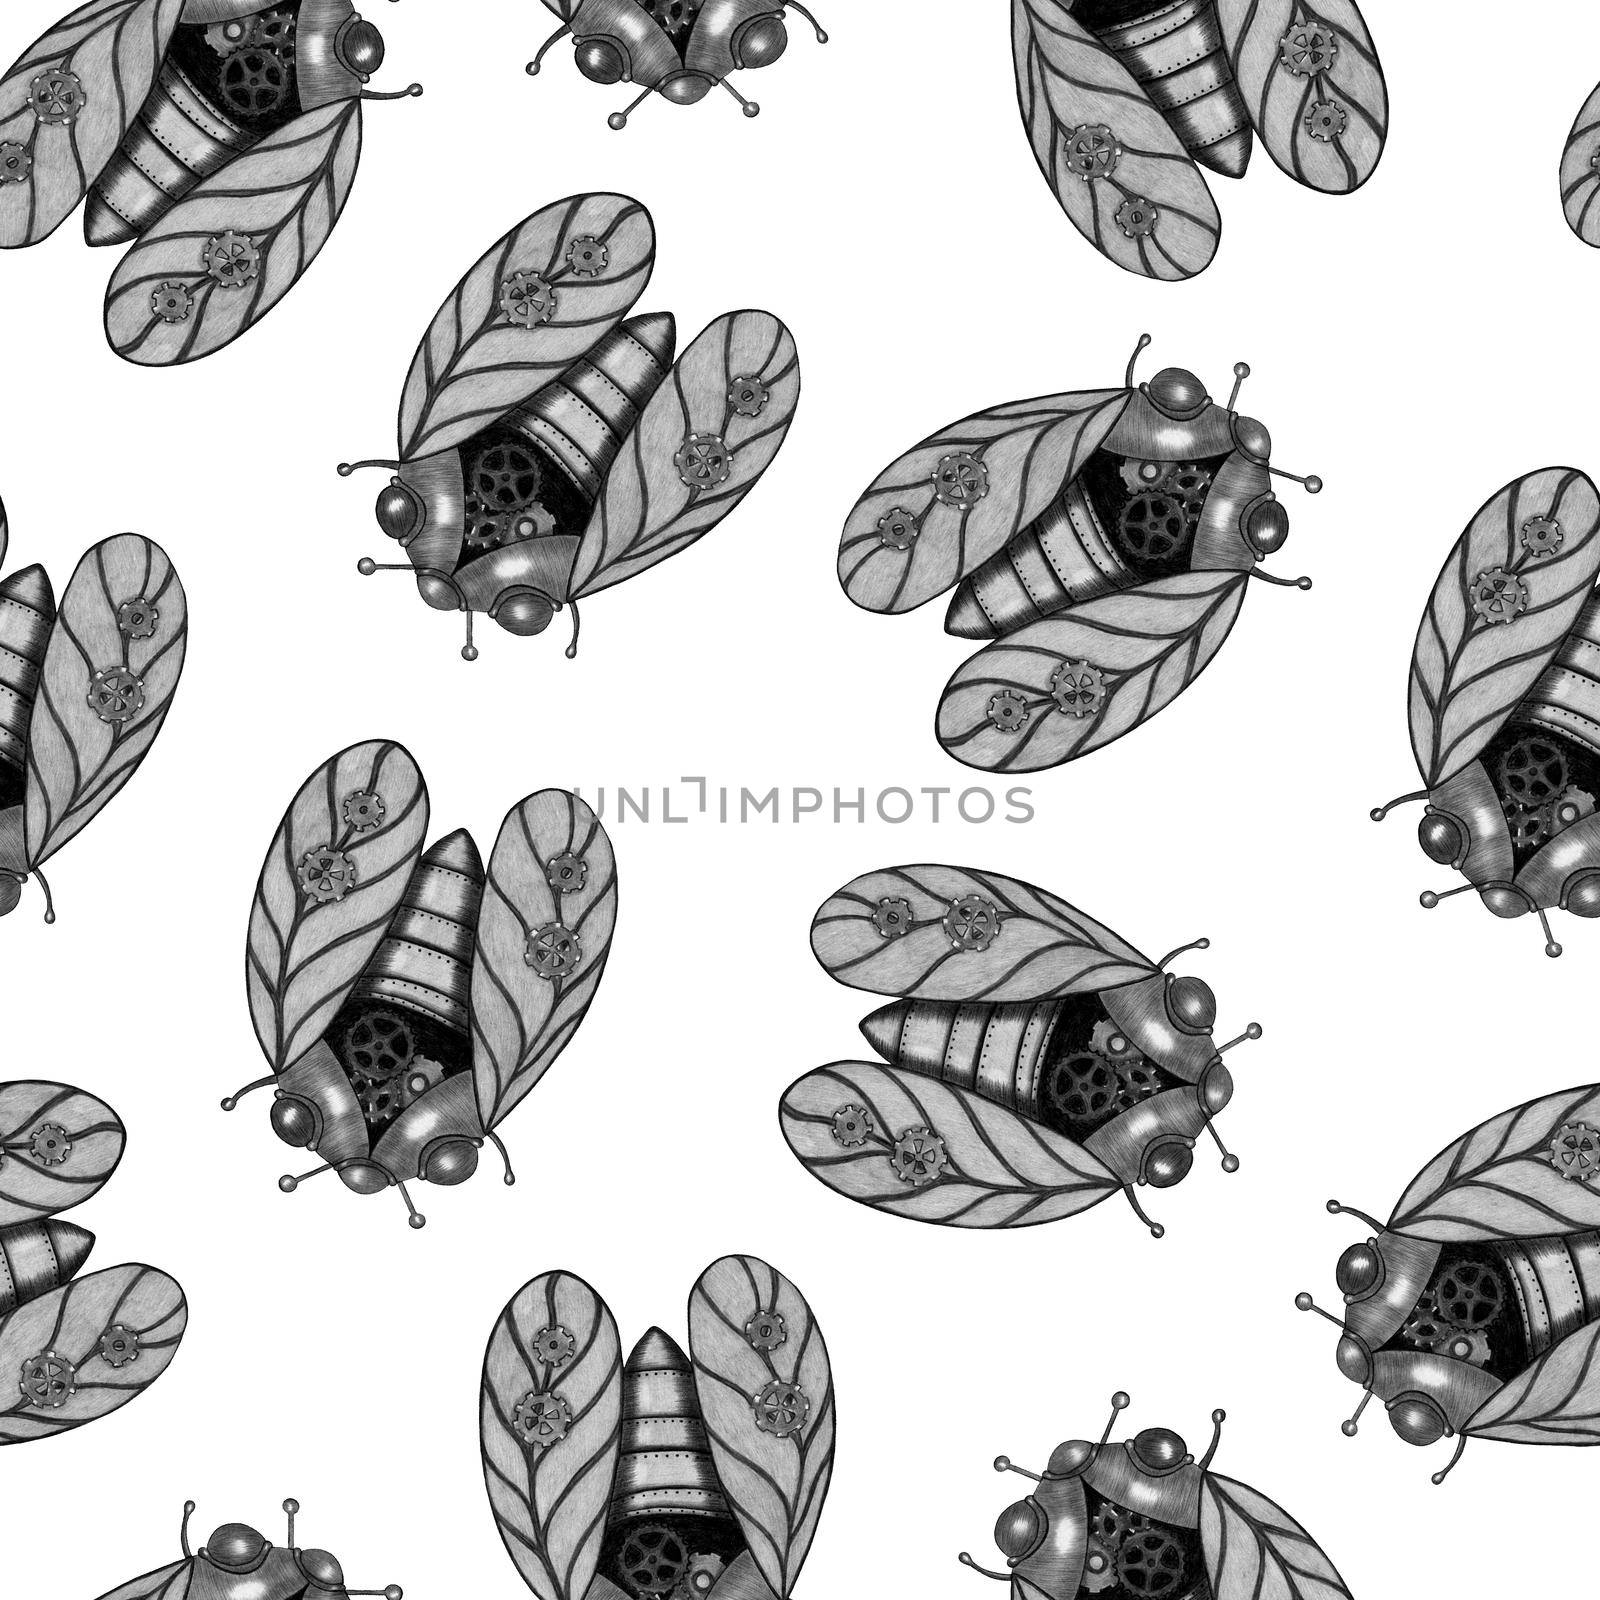 Hand Drawn Seamless Pattern of Black and White Steampunk Cicada in Gray Colors on White Background. Steampunk Cicada Design Element Drawn by Pencil.